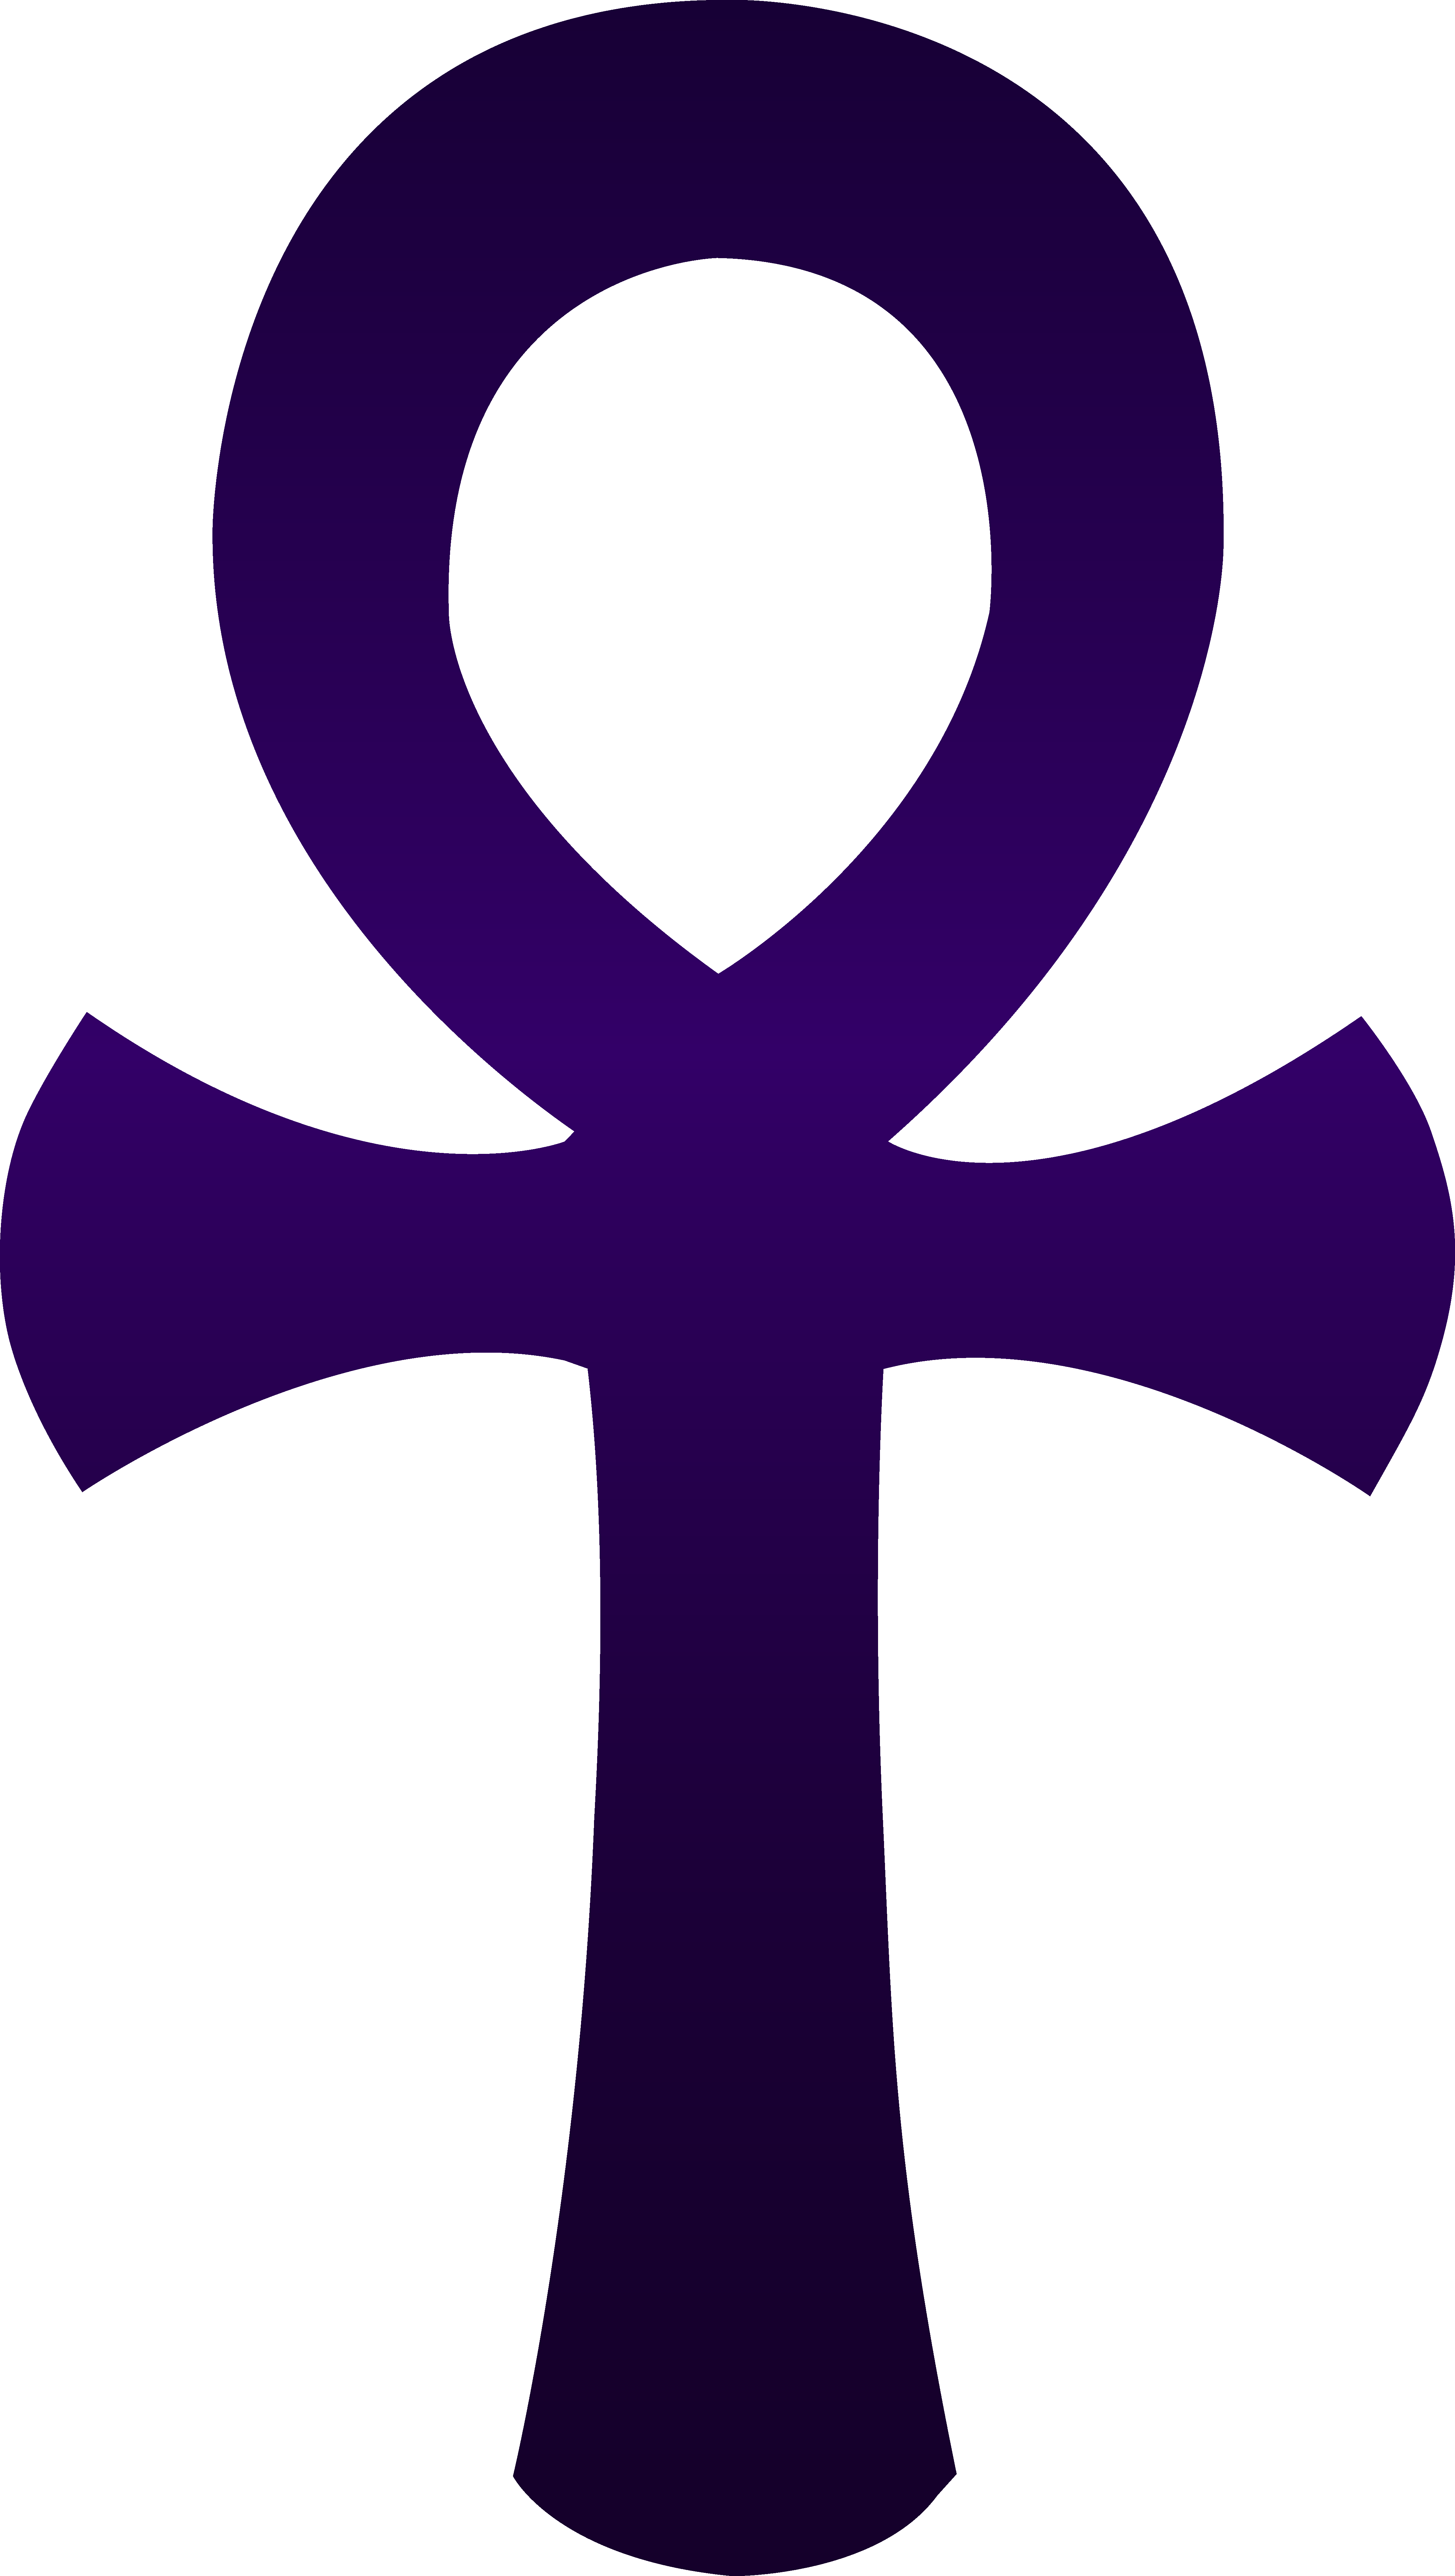 1,285 Ankh Tattoo Images, Stock Photos, 3D objects, & Vectors | Shutterstock